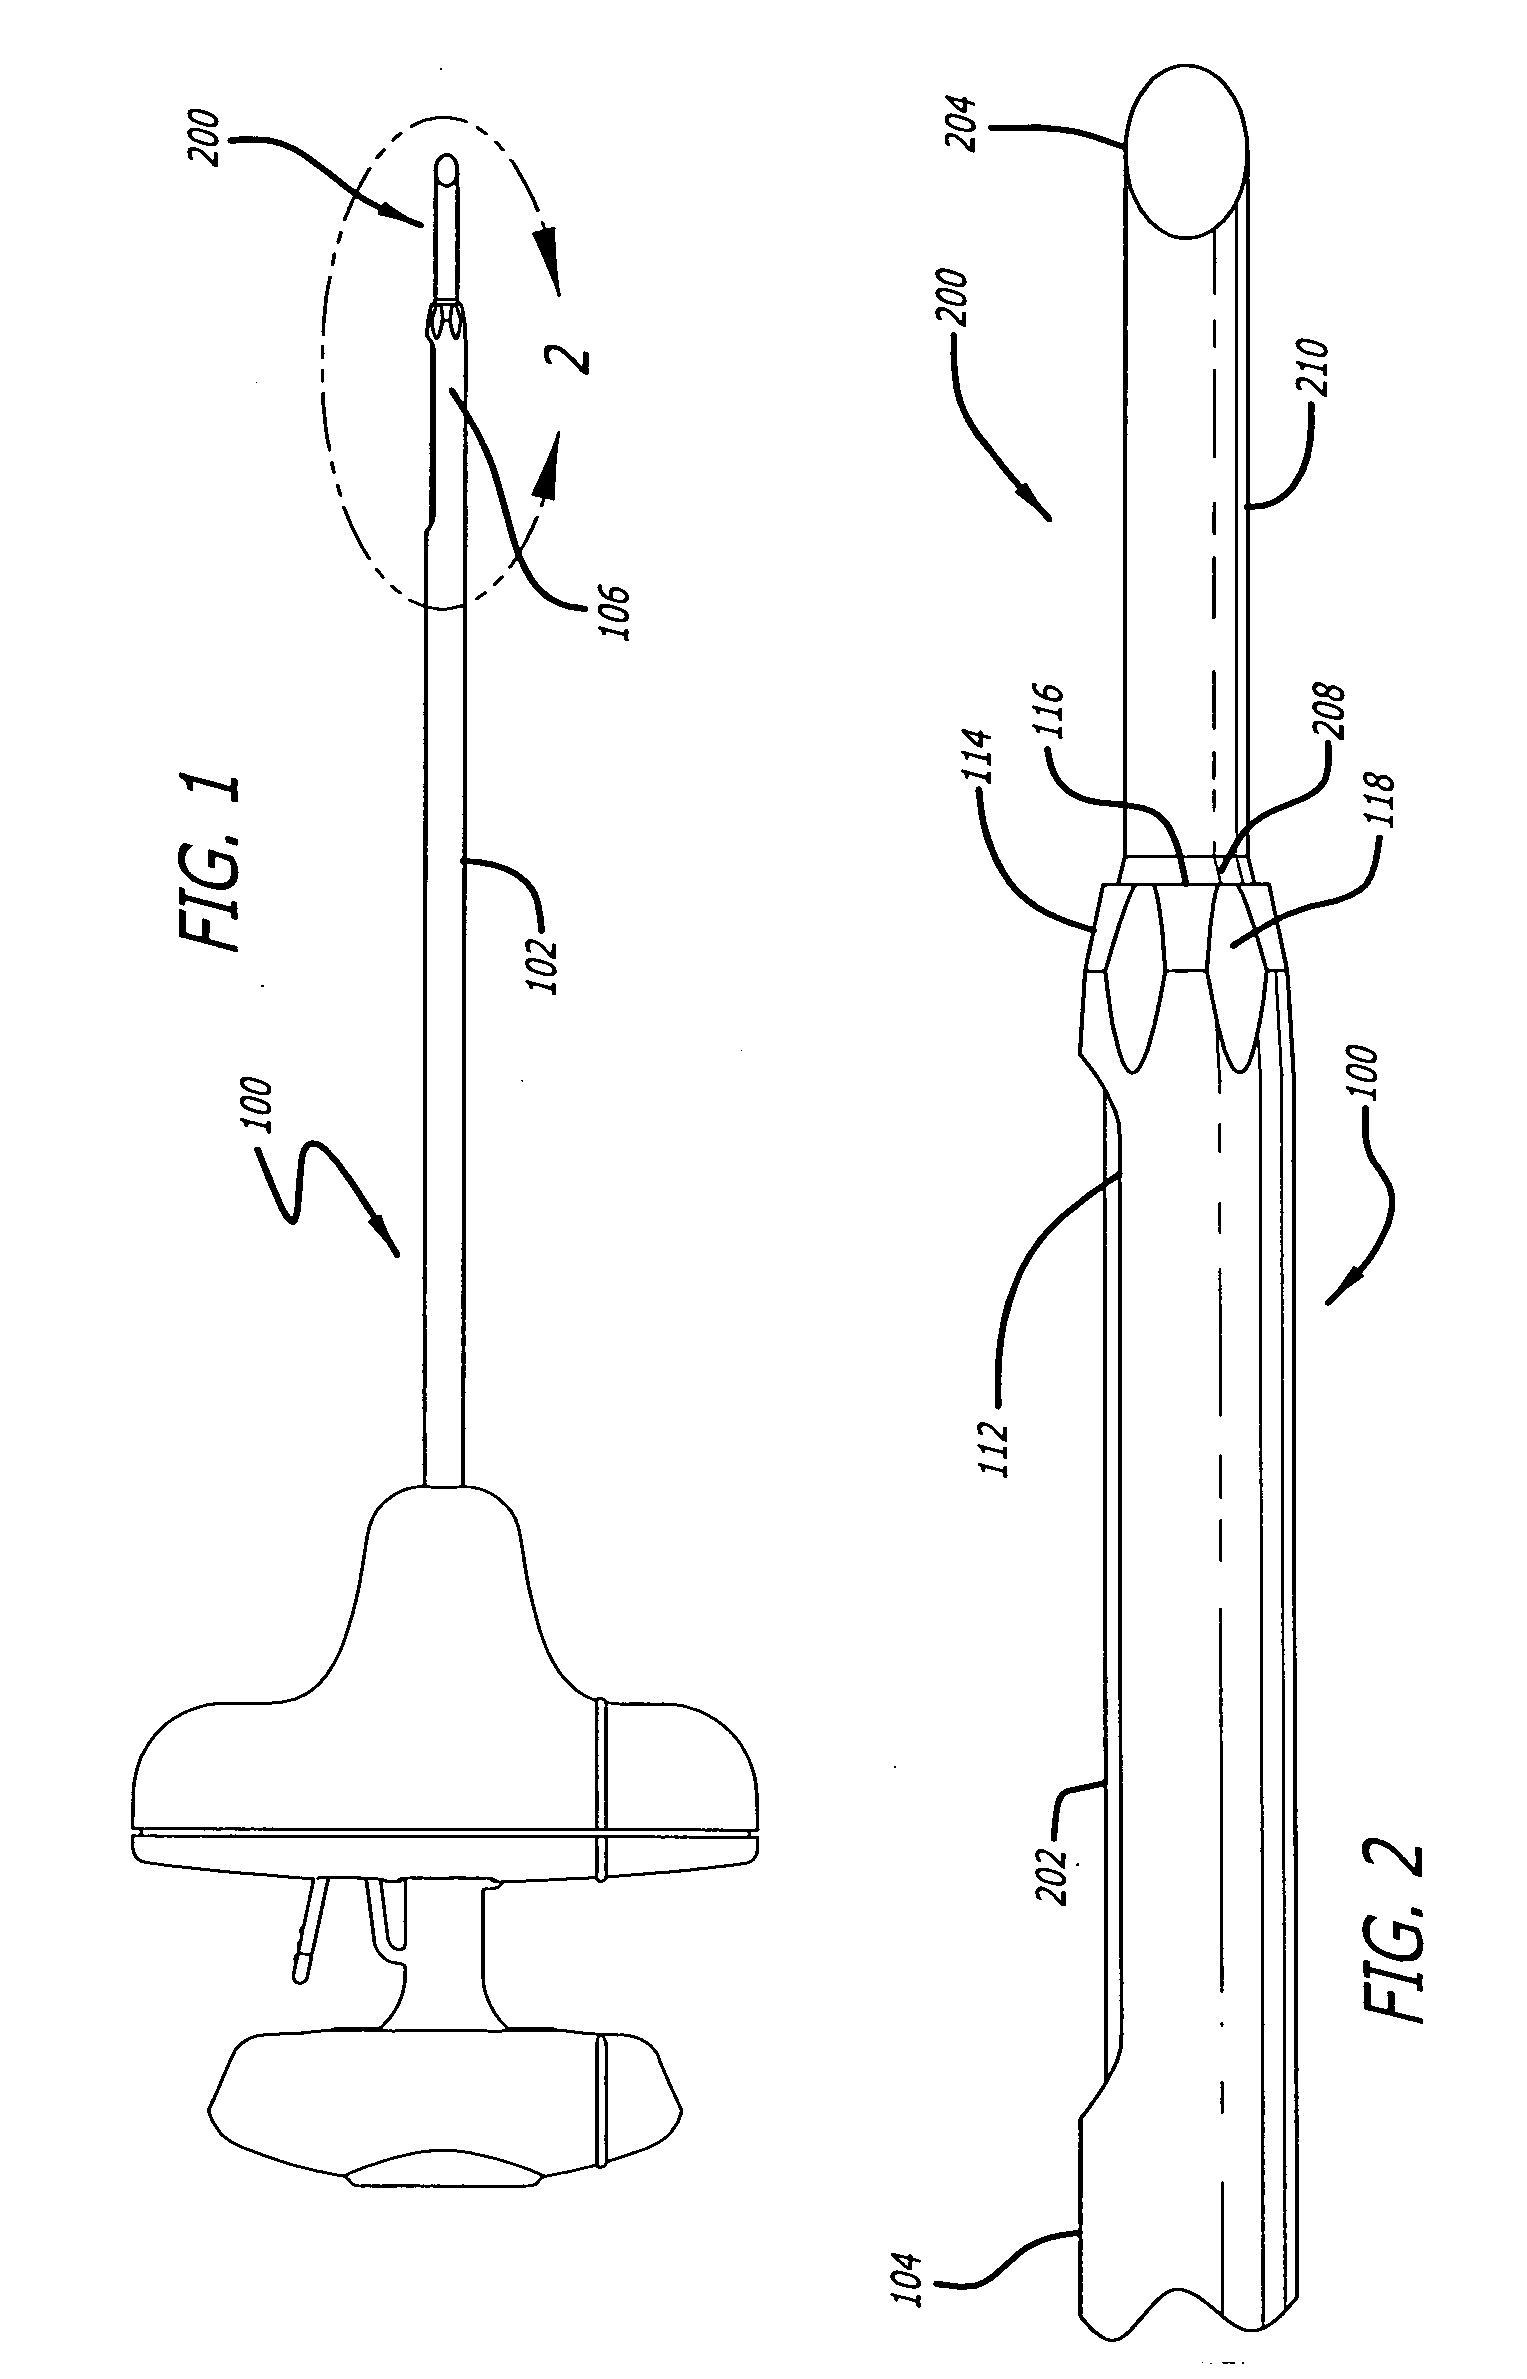 Method for use of dilating stylet and cannula